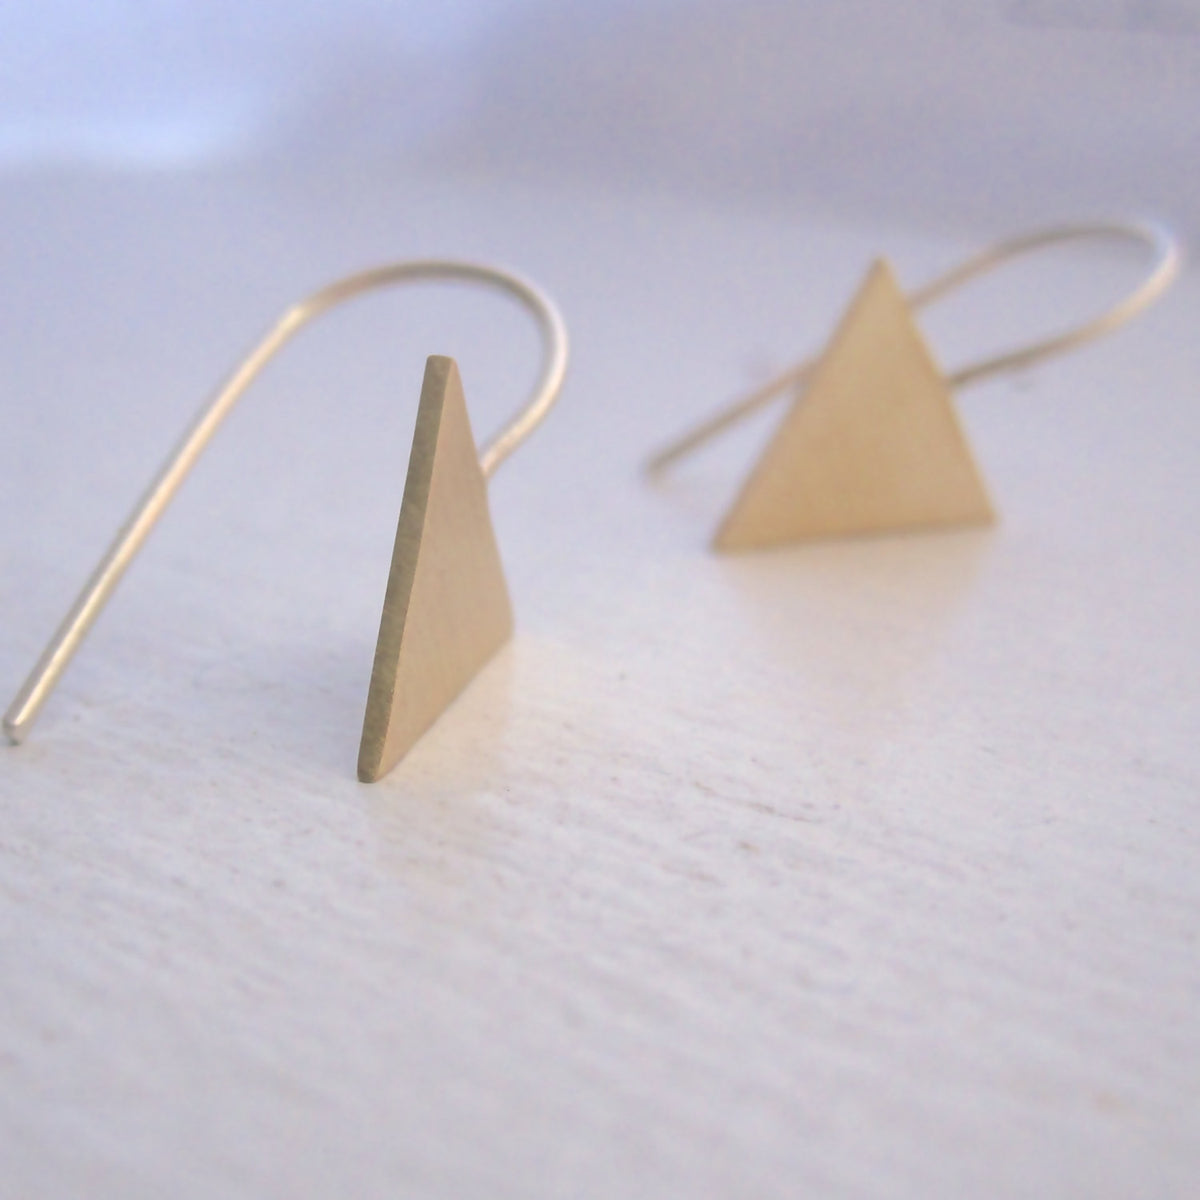 Make A Statement With These Tribal Aztec Arrow Drop Dangle Earrings - 0135 - Virginia Wynne Designs